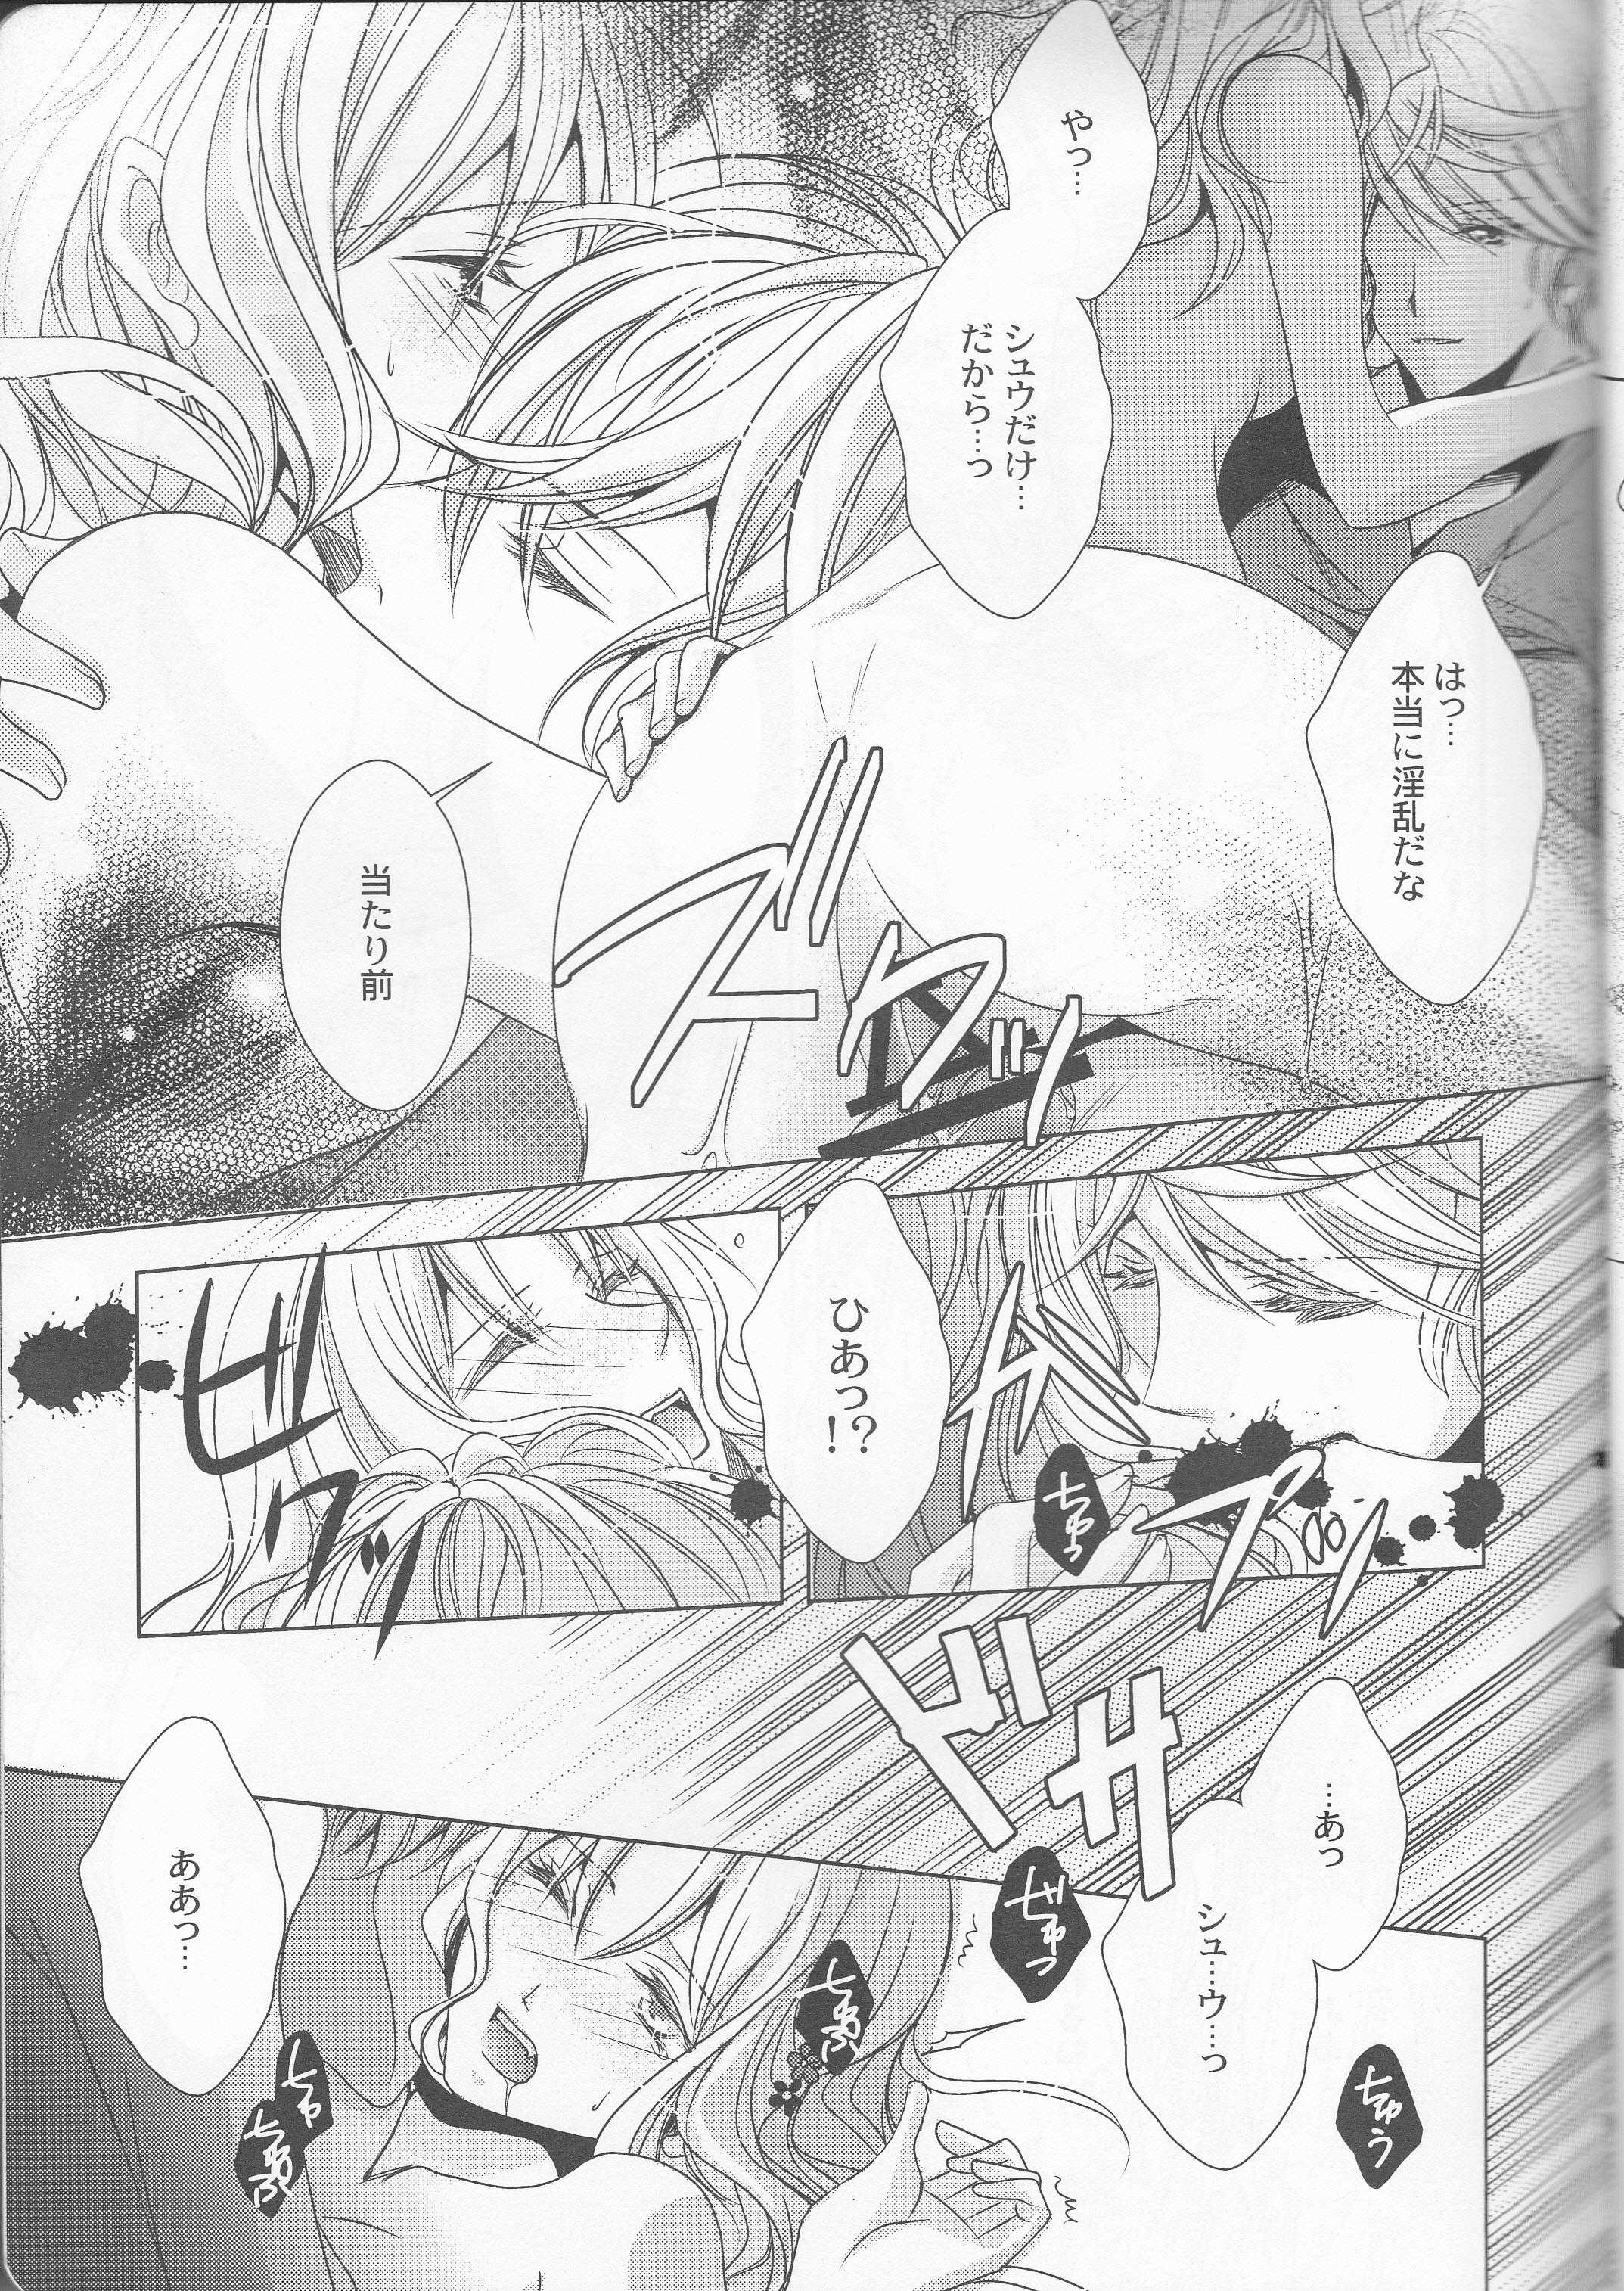 Penetration How to Blood - Diabolik lovers Muscle - Page 11